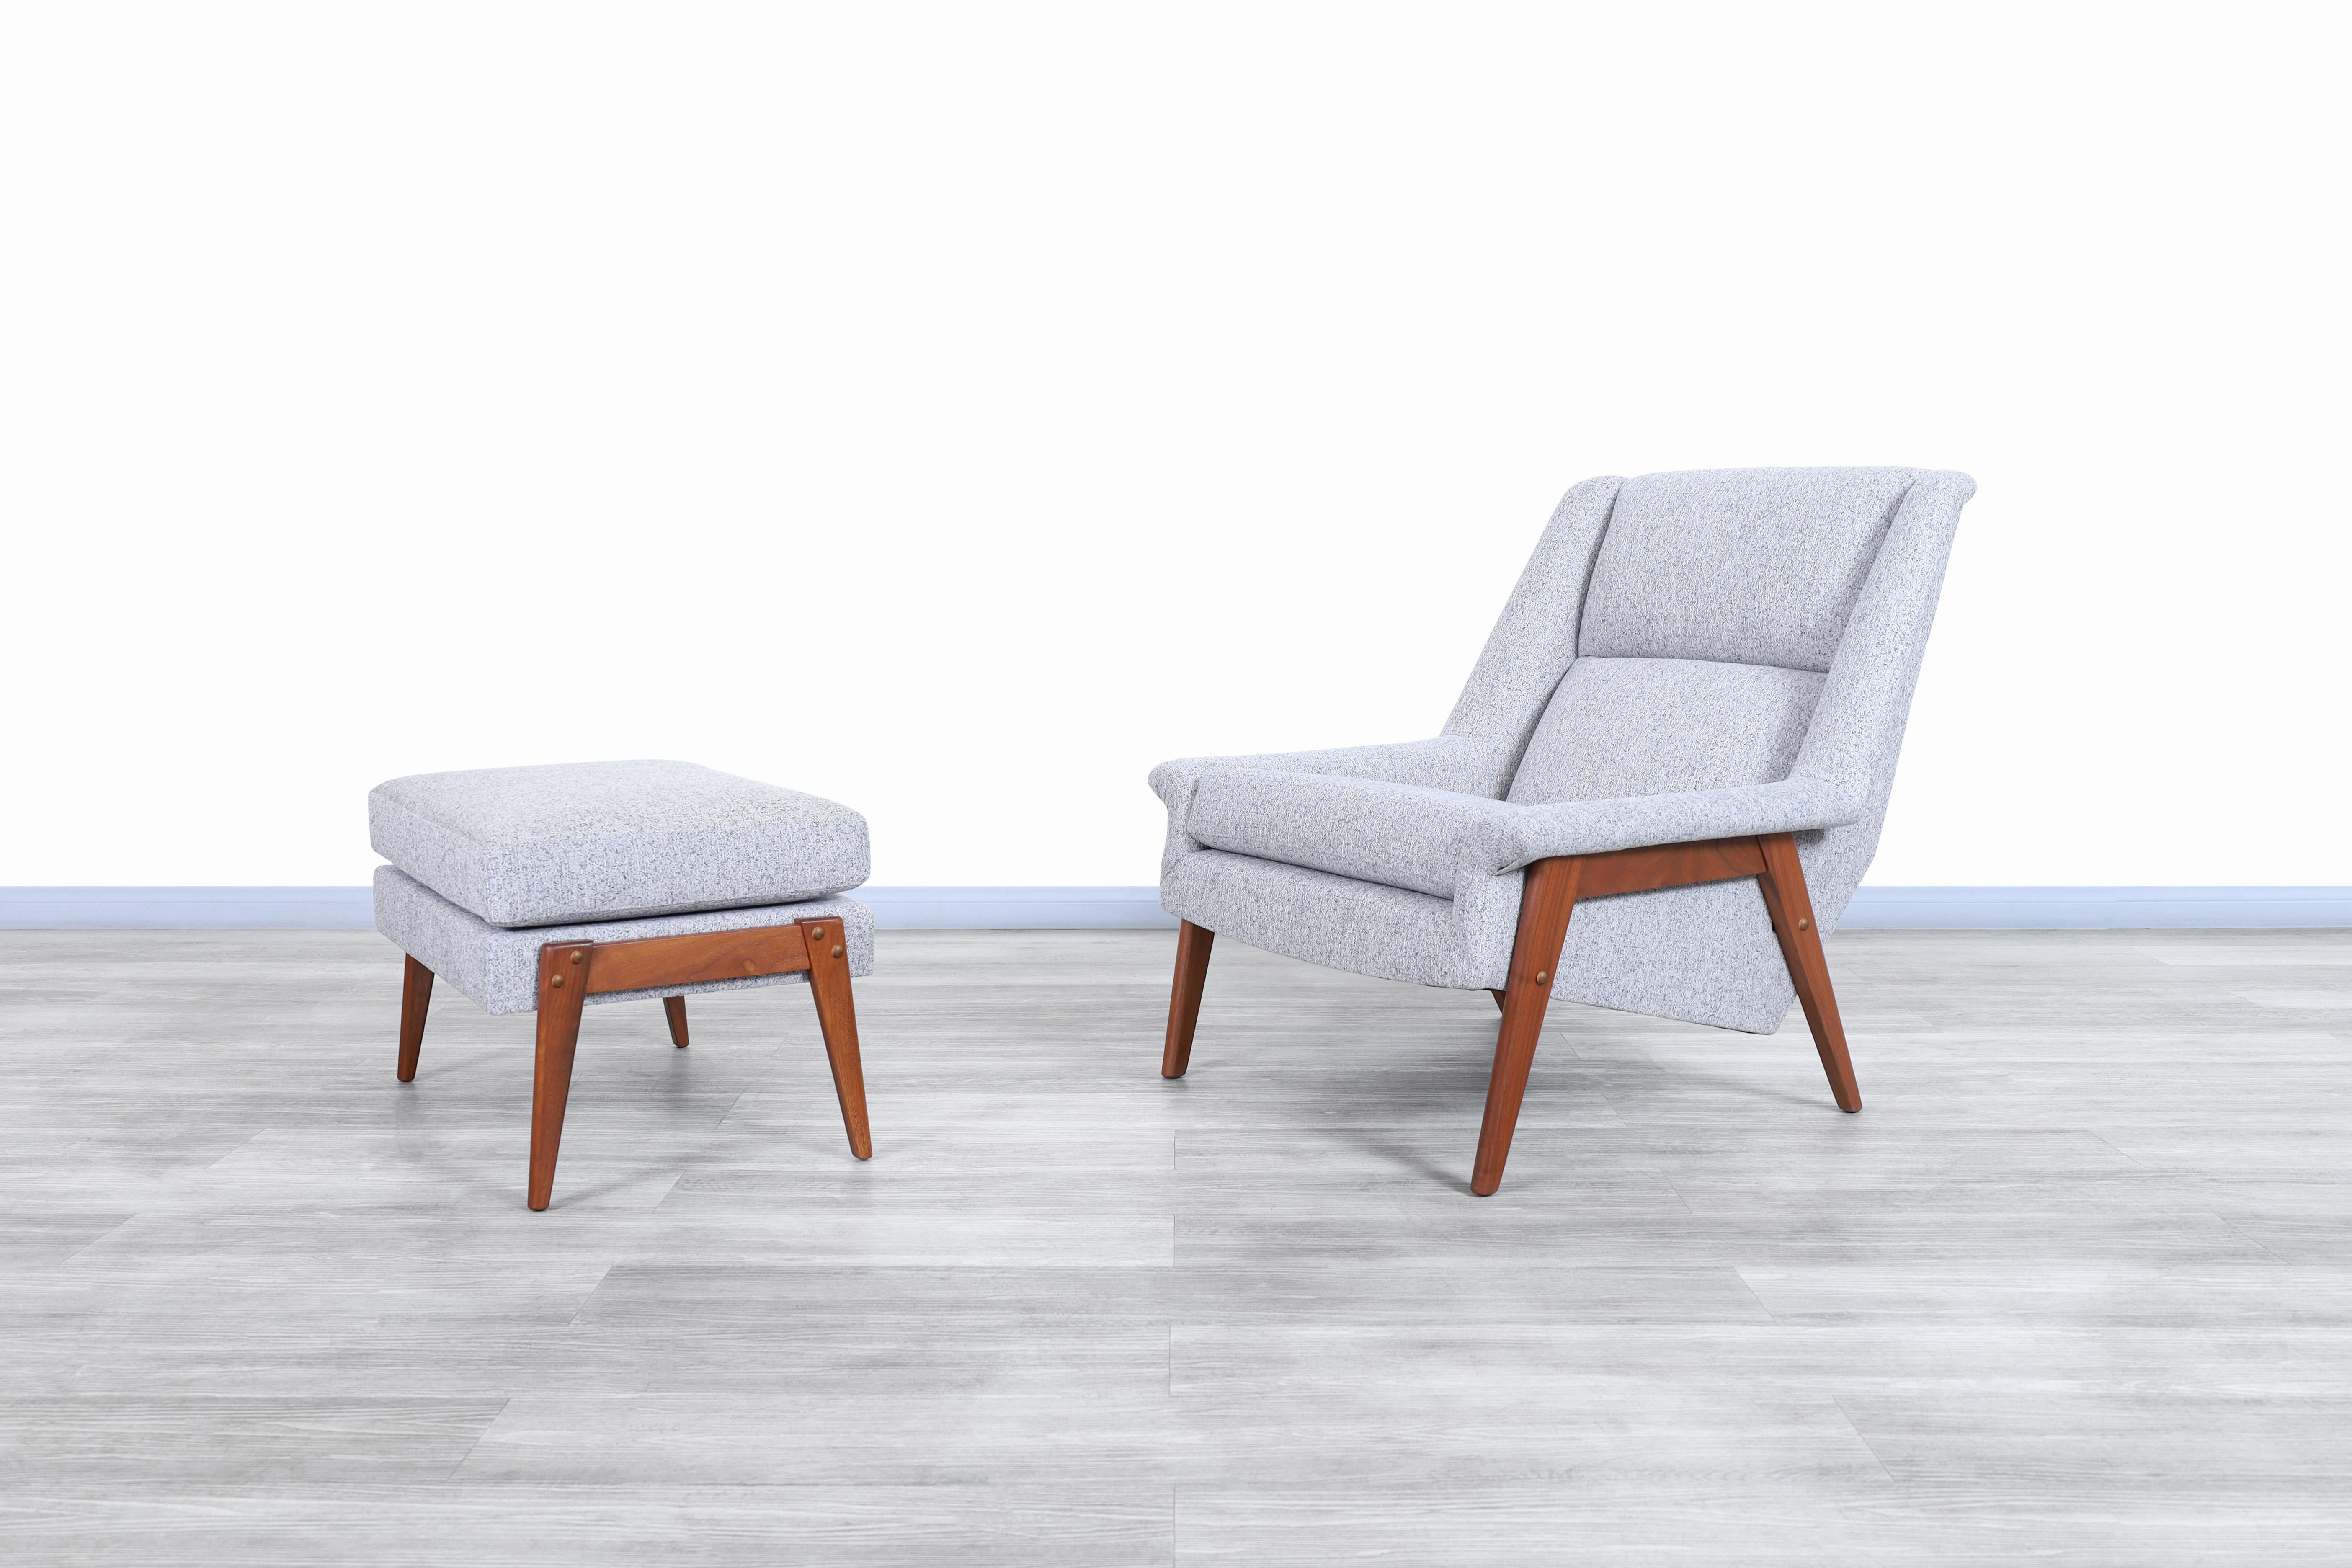 Amazing vintage walnut lounge chair and ottoman attributed to Folke Ohlsson and manufactured circa 1950s. Both the chair and the ottoman have a representative design of the Scandinavian era, where the elegant lines that make up the detailed edges of